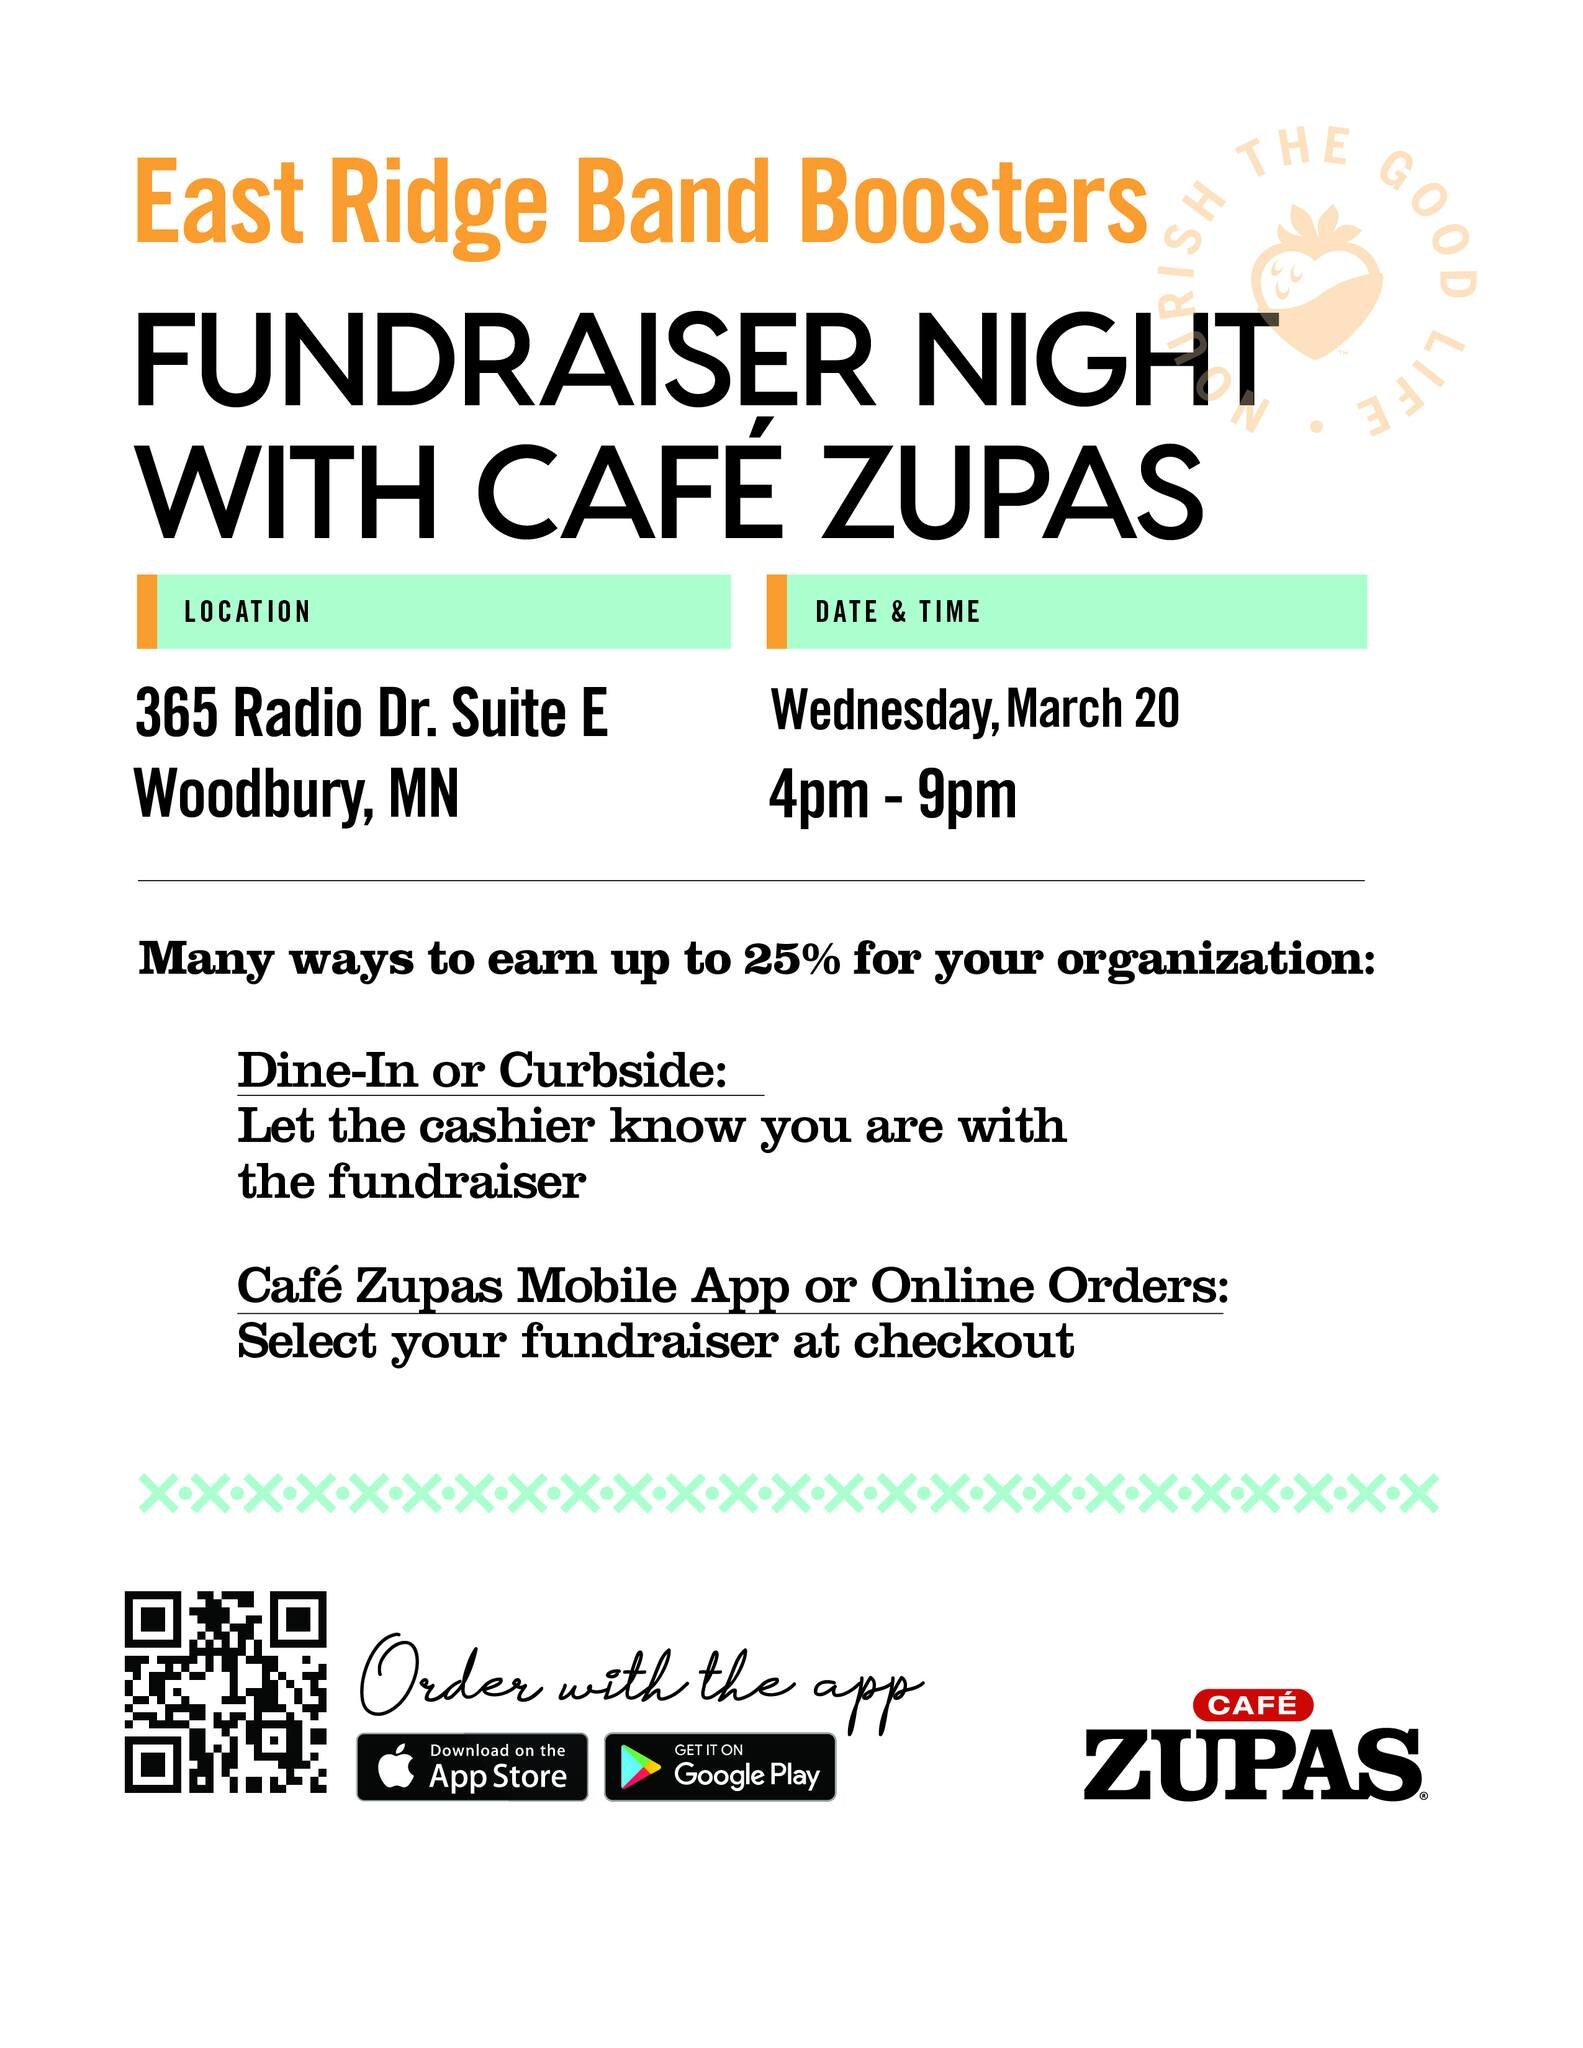 Remember to eat at Zupa's tonight!